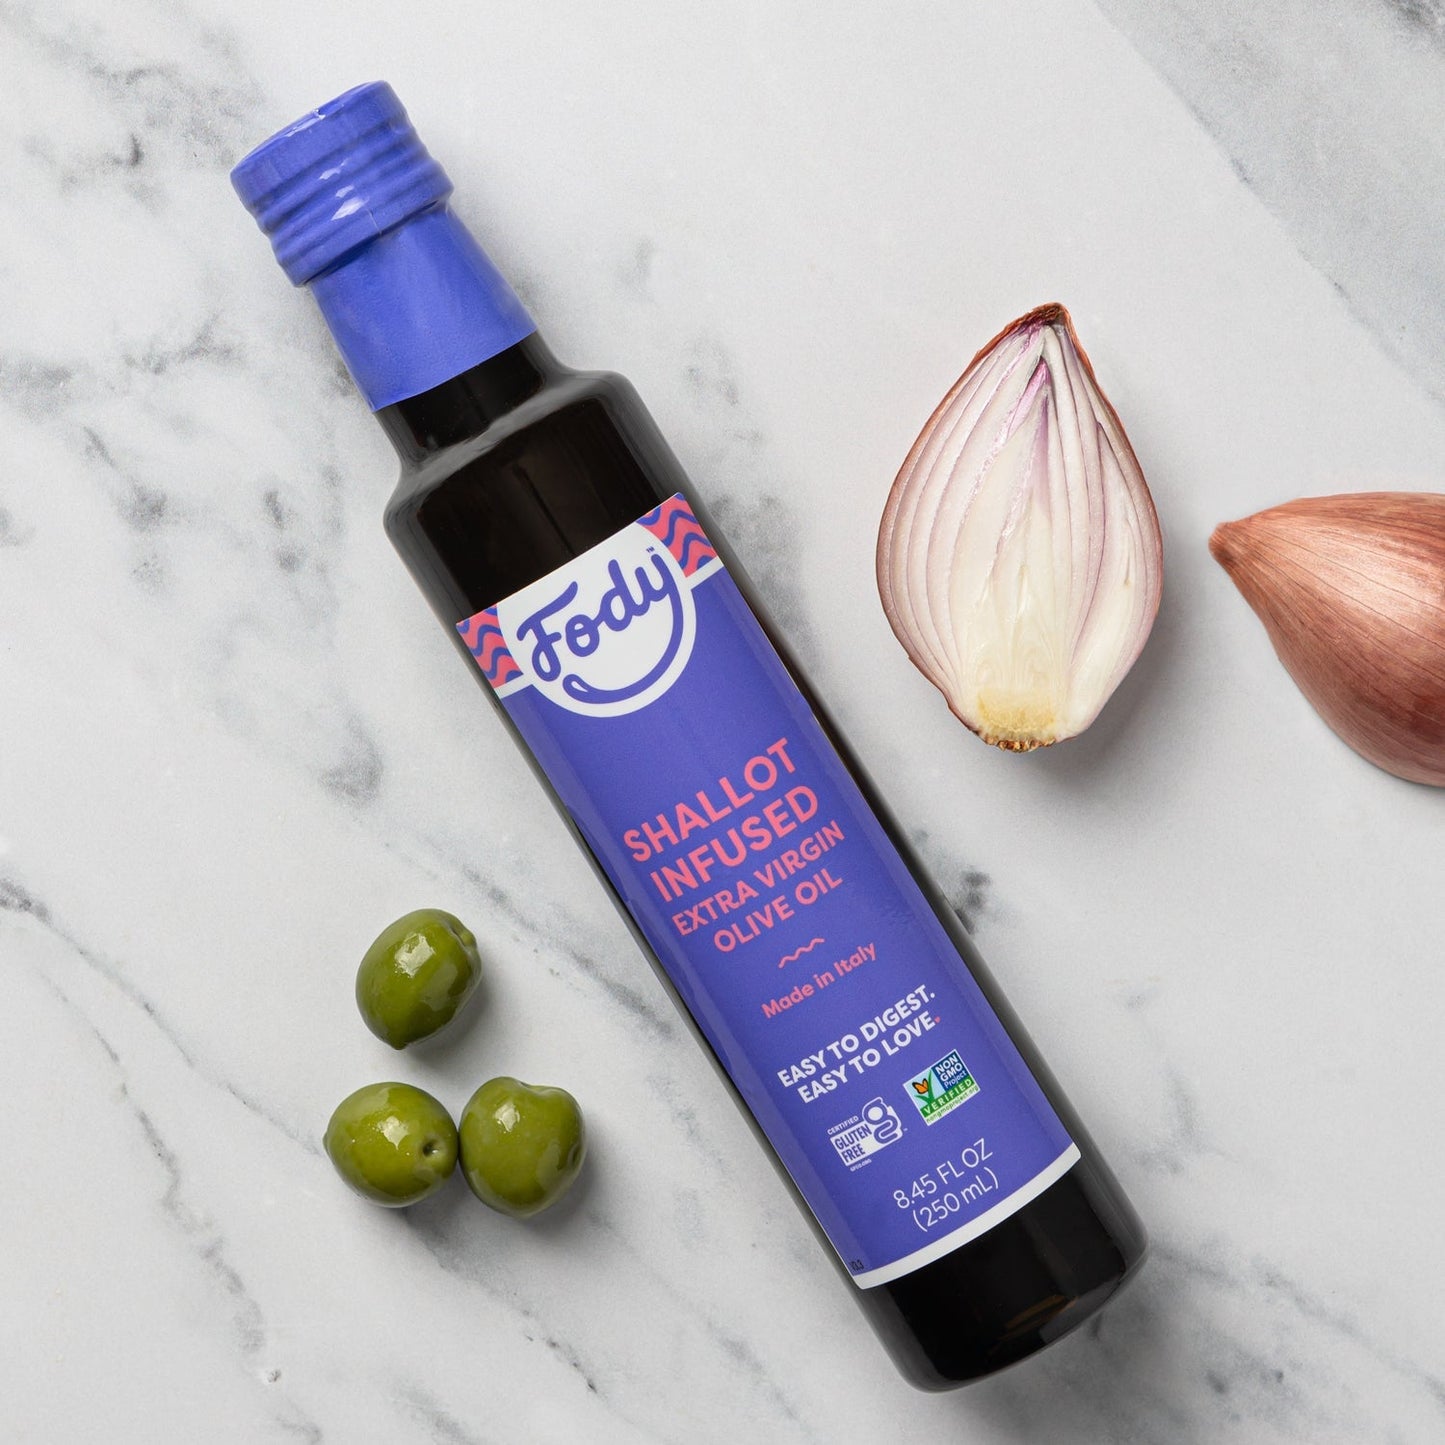 Shallot Infused Olive Oil (250ml)